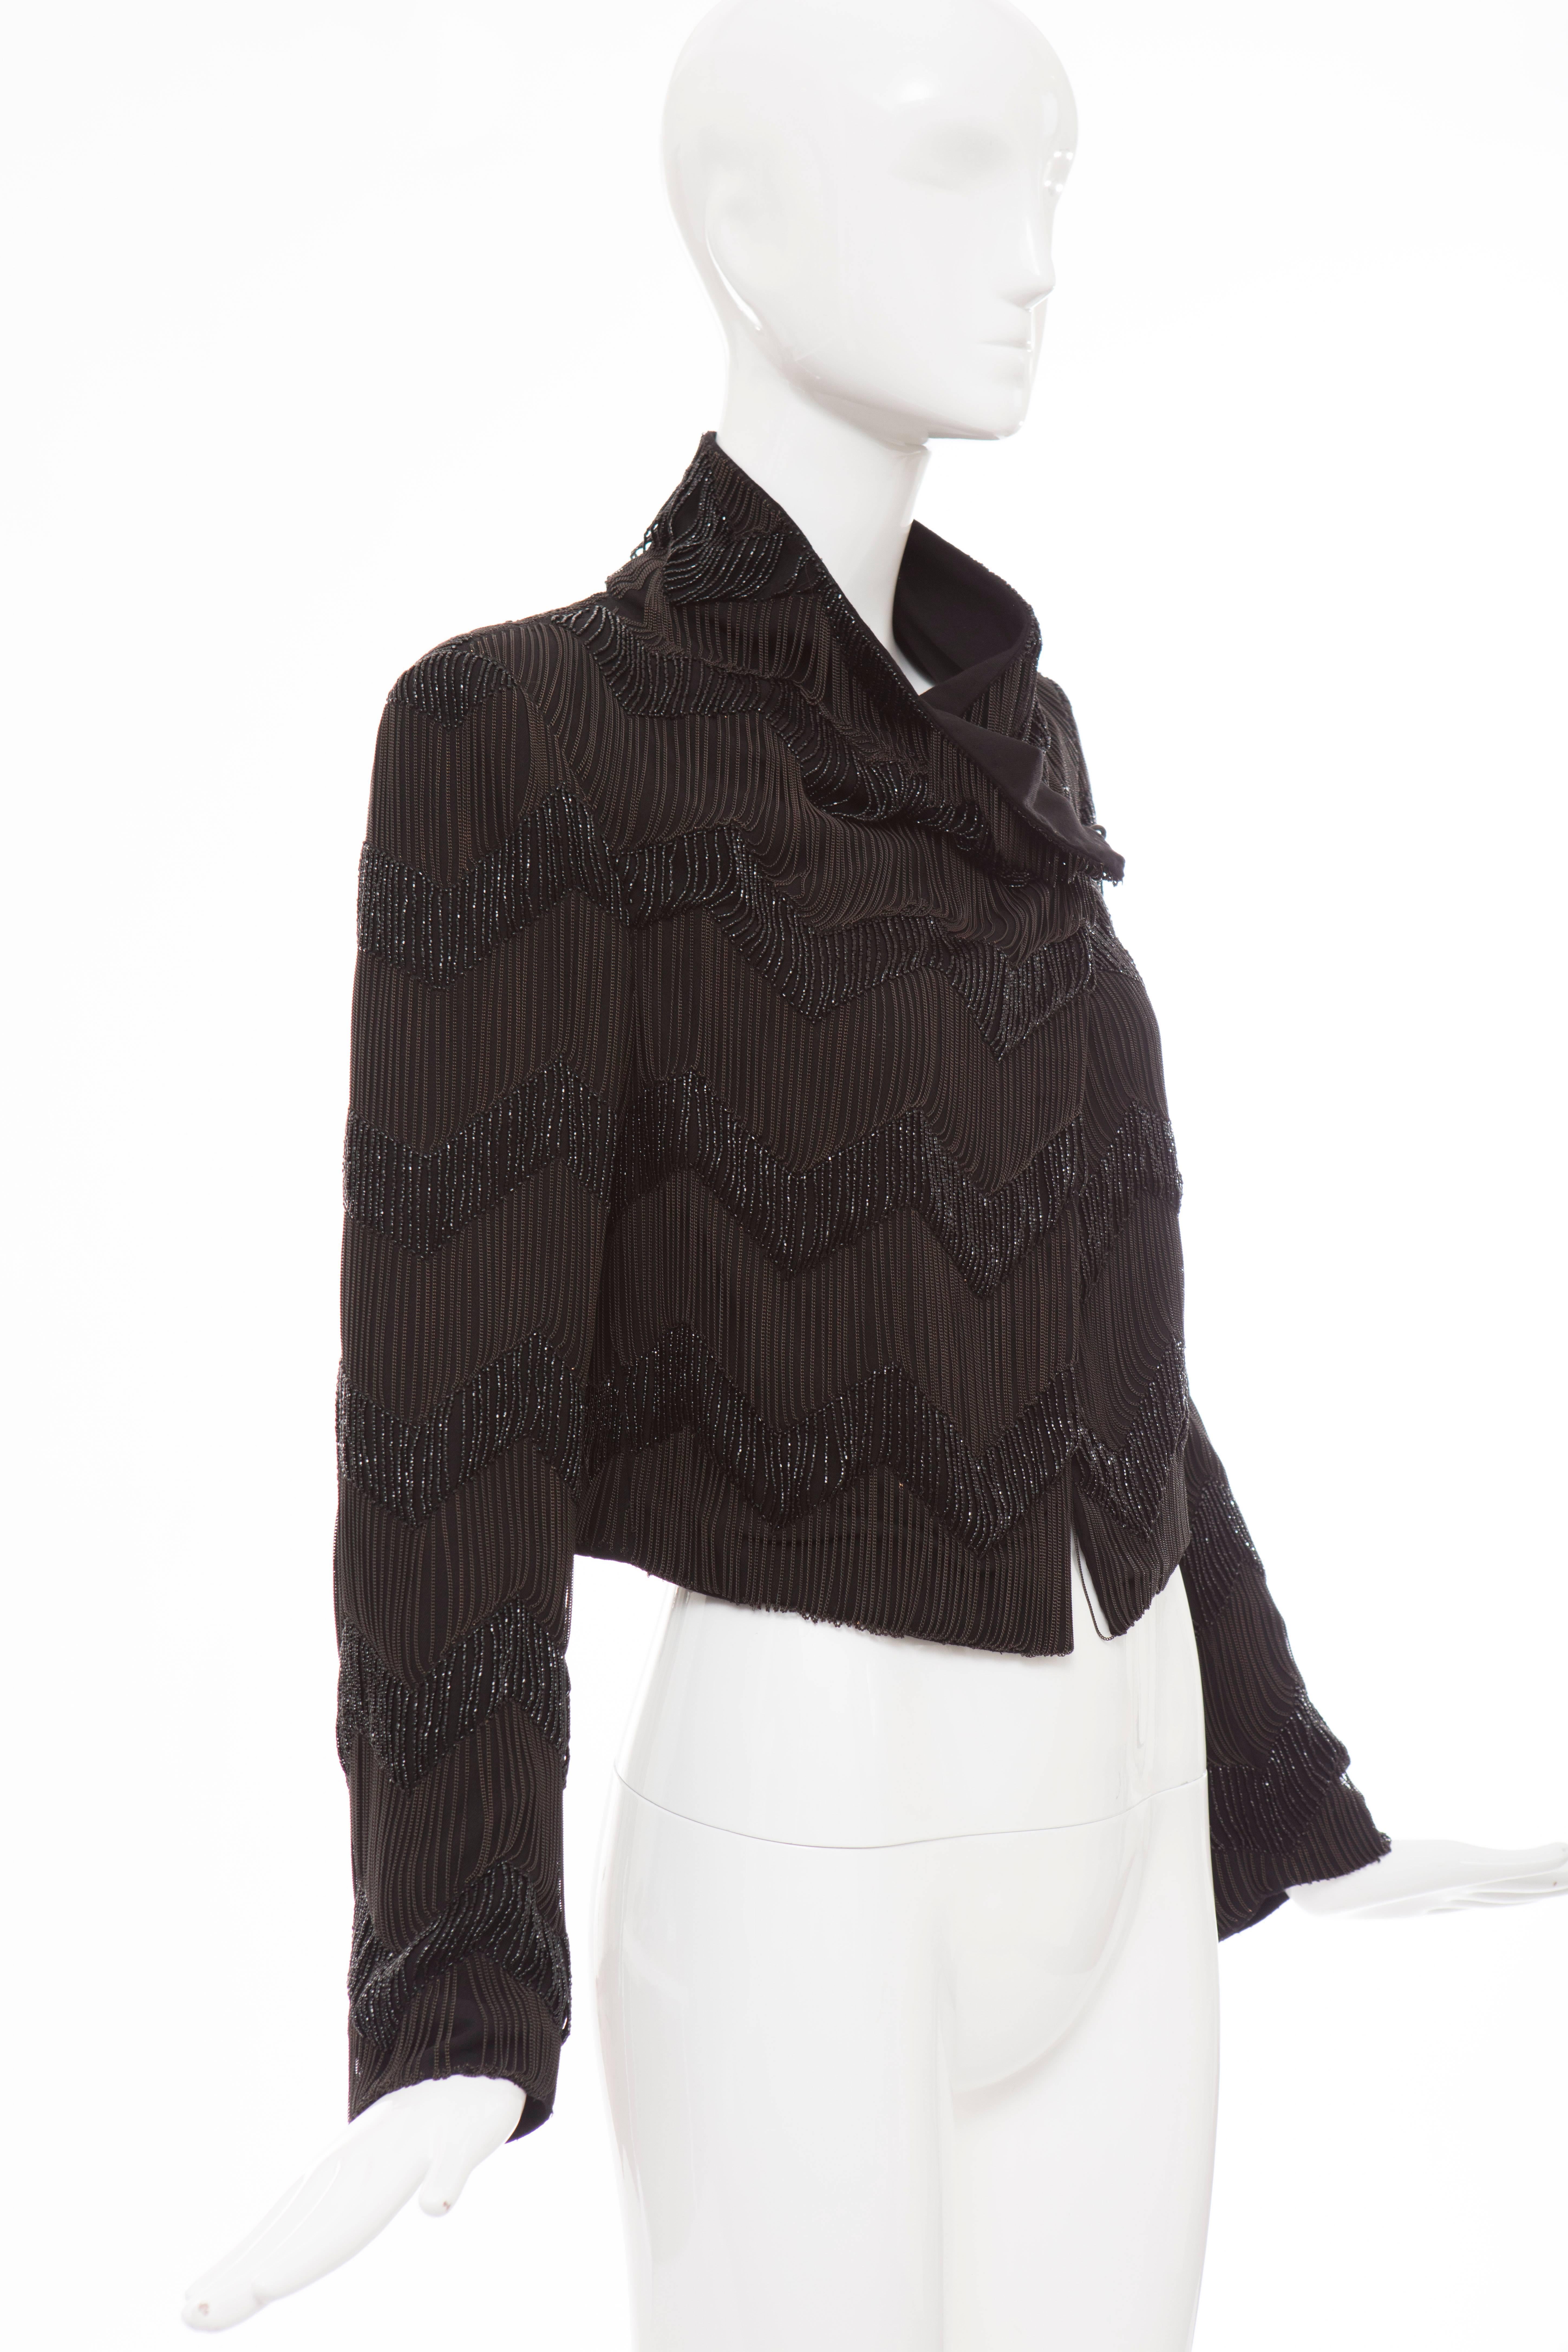 Women's Ann Demeulemeester Runway Black Wool Chain And Beaded Jacket, Fall 2011 For Sale